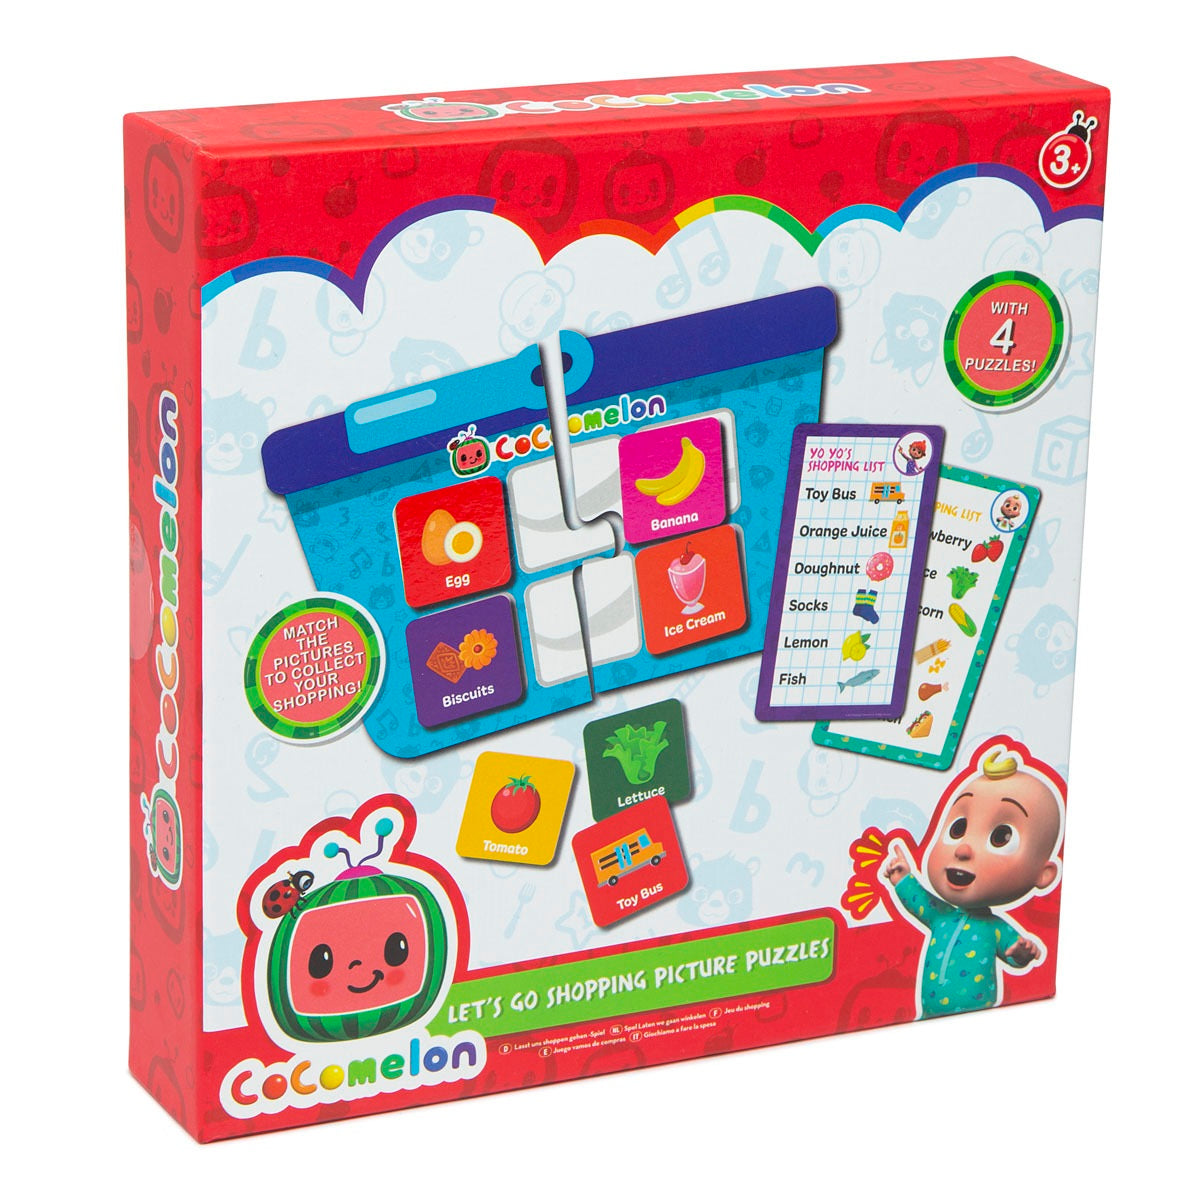 CoComelon Let's Go Shopping Picture Puzzles